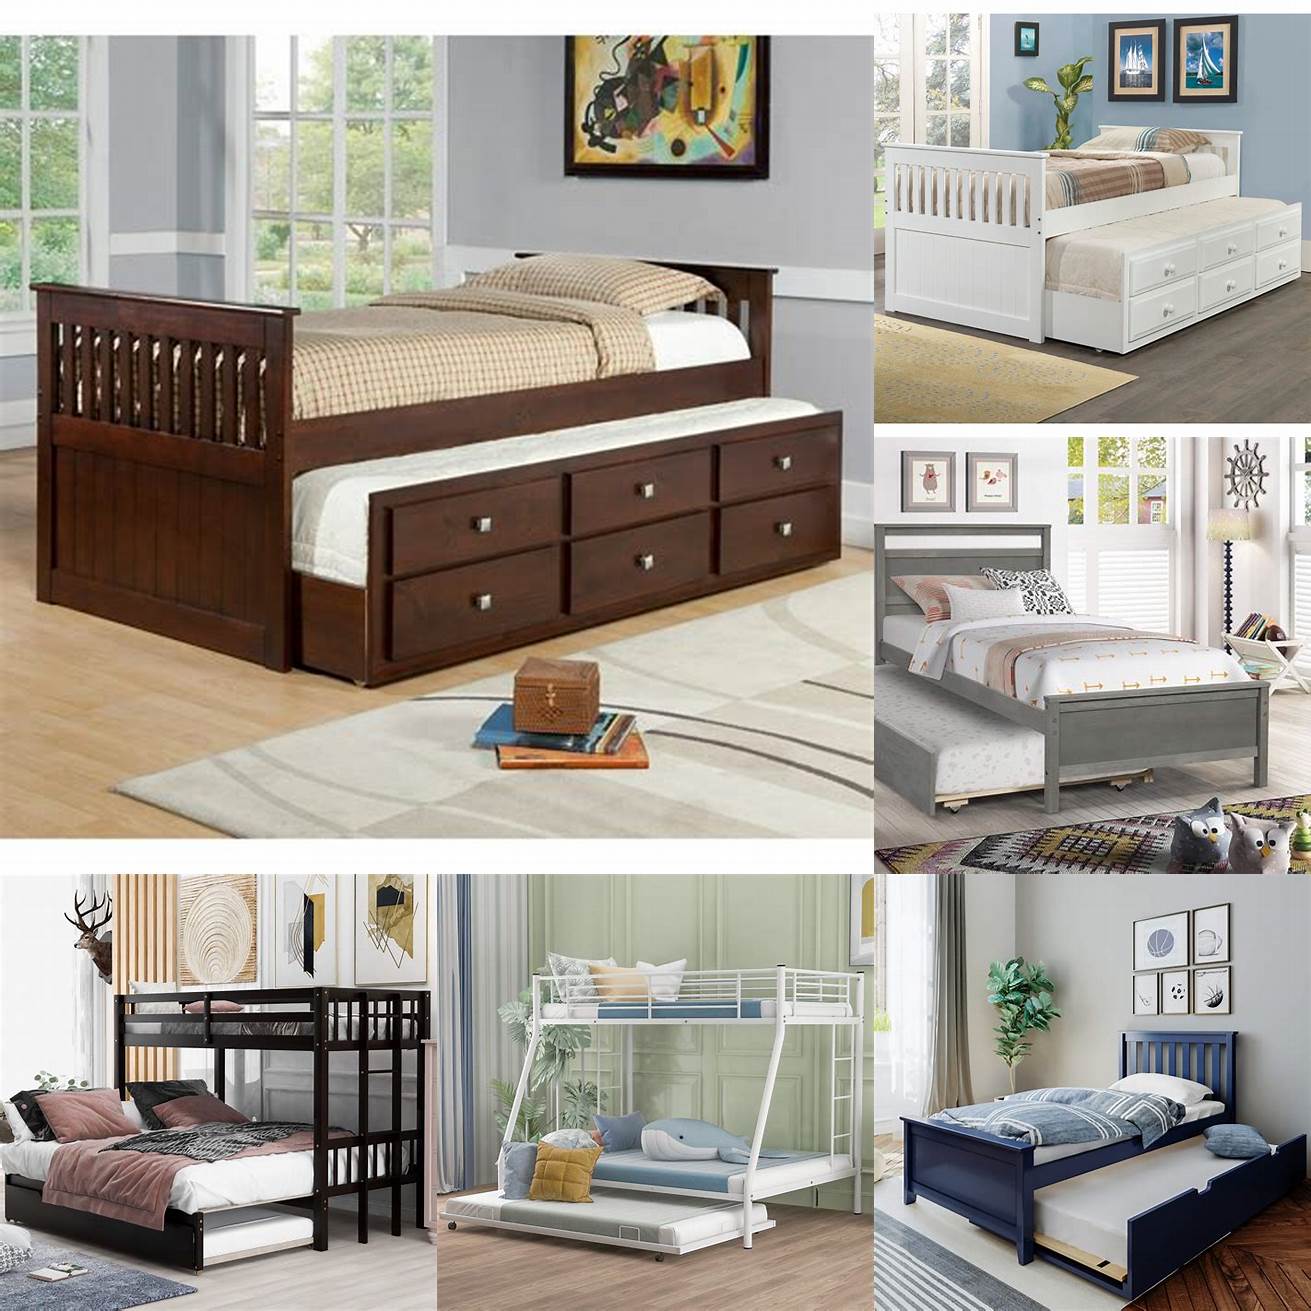 Cost-effective Purchasing a twin bed with trundle is often more cost-effective than buying two separate beds This is especially true if you are on a budget or if you only need the extra bed occasionally